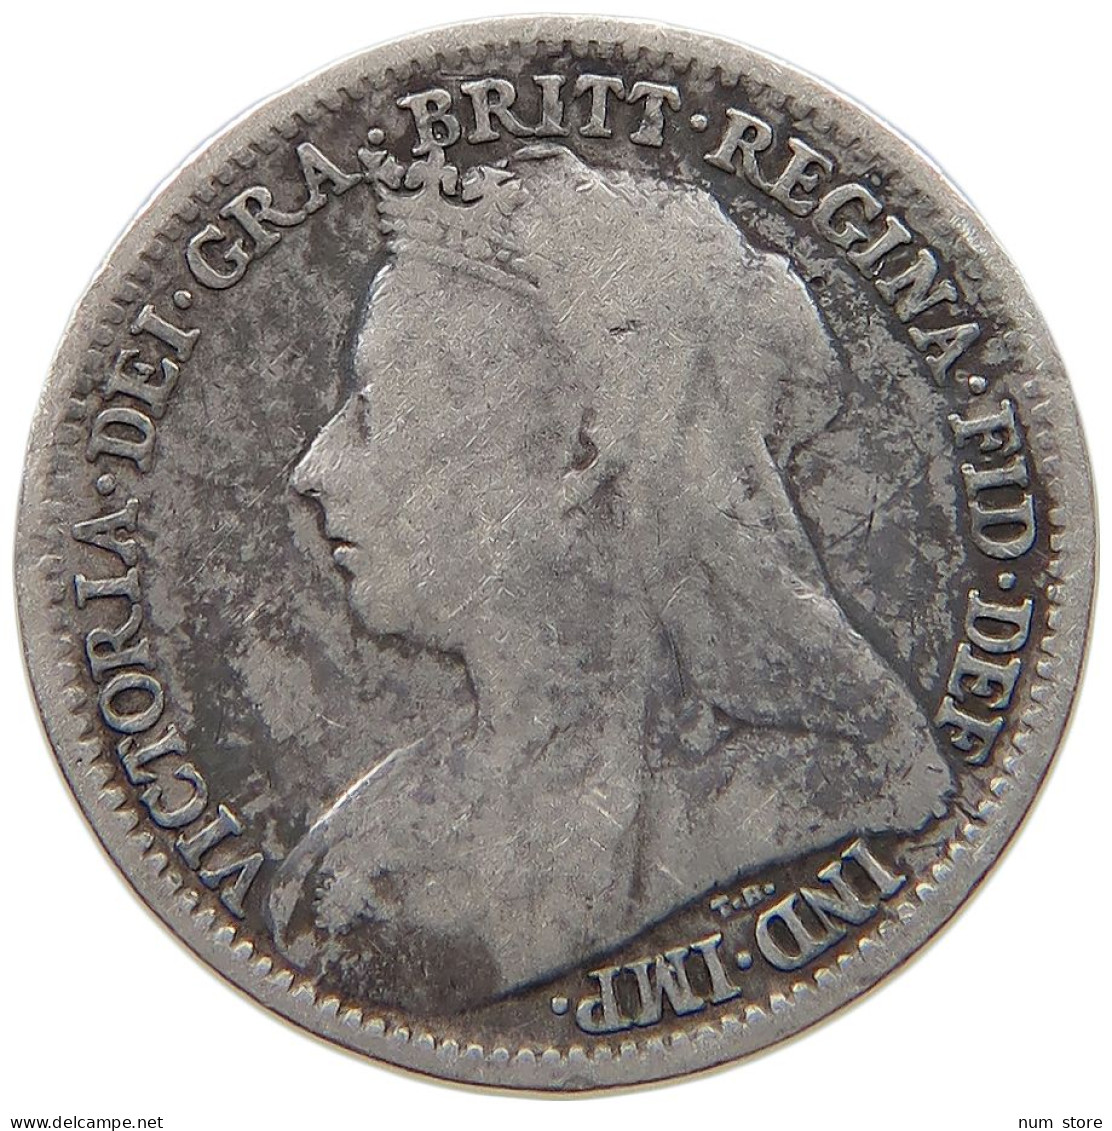 GREAT BRITAIN THREEPENCE 1896 Victoria 1837-1901 #a034 0051 - F. 3 Pence